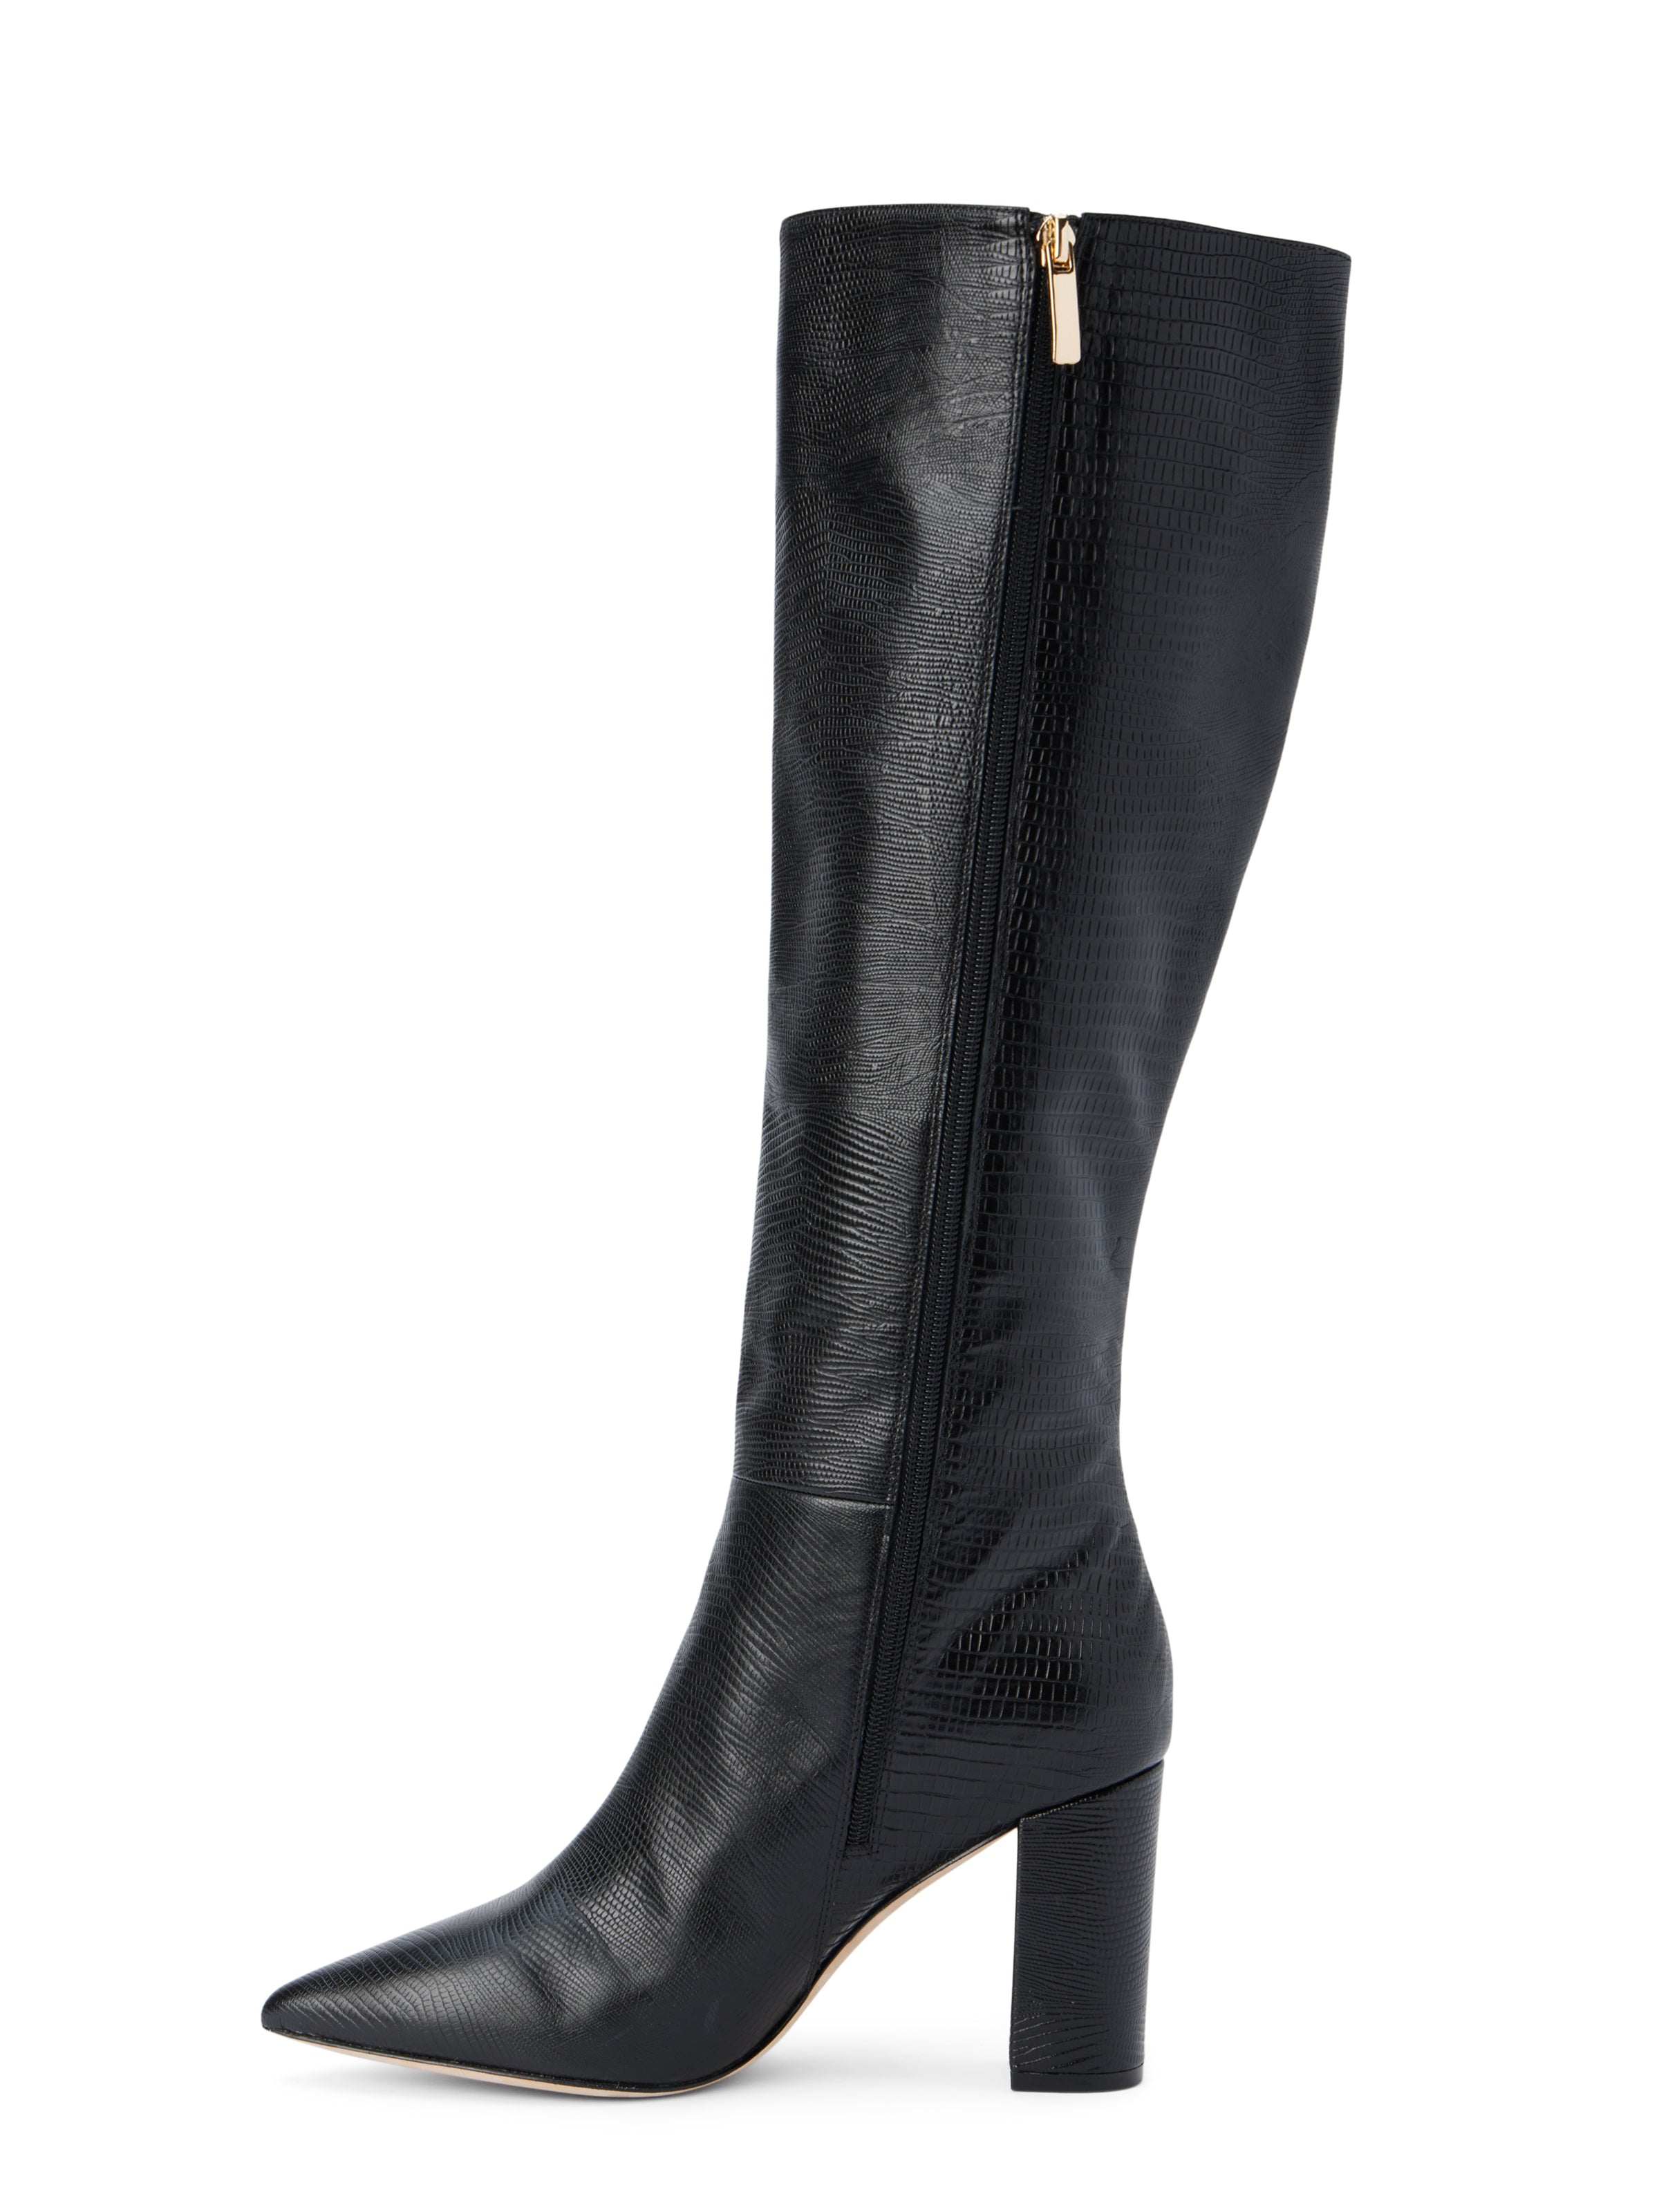 L'AGENCE Christiane Boot in Black Lizard Leather